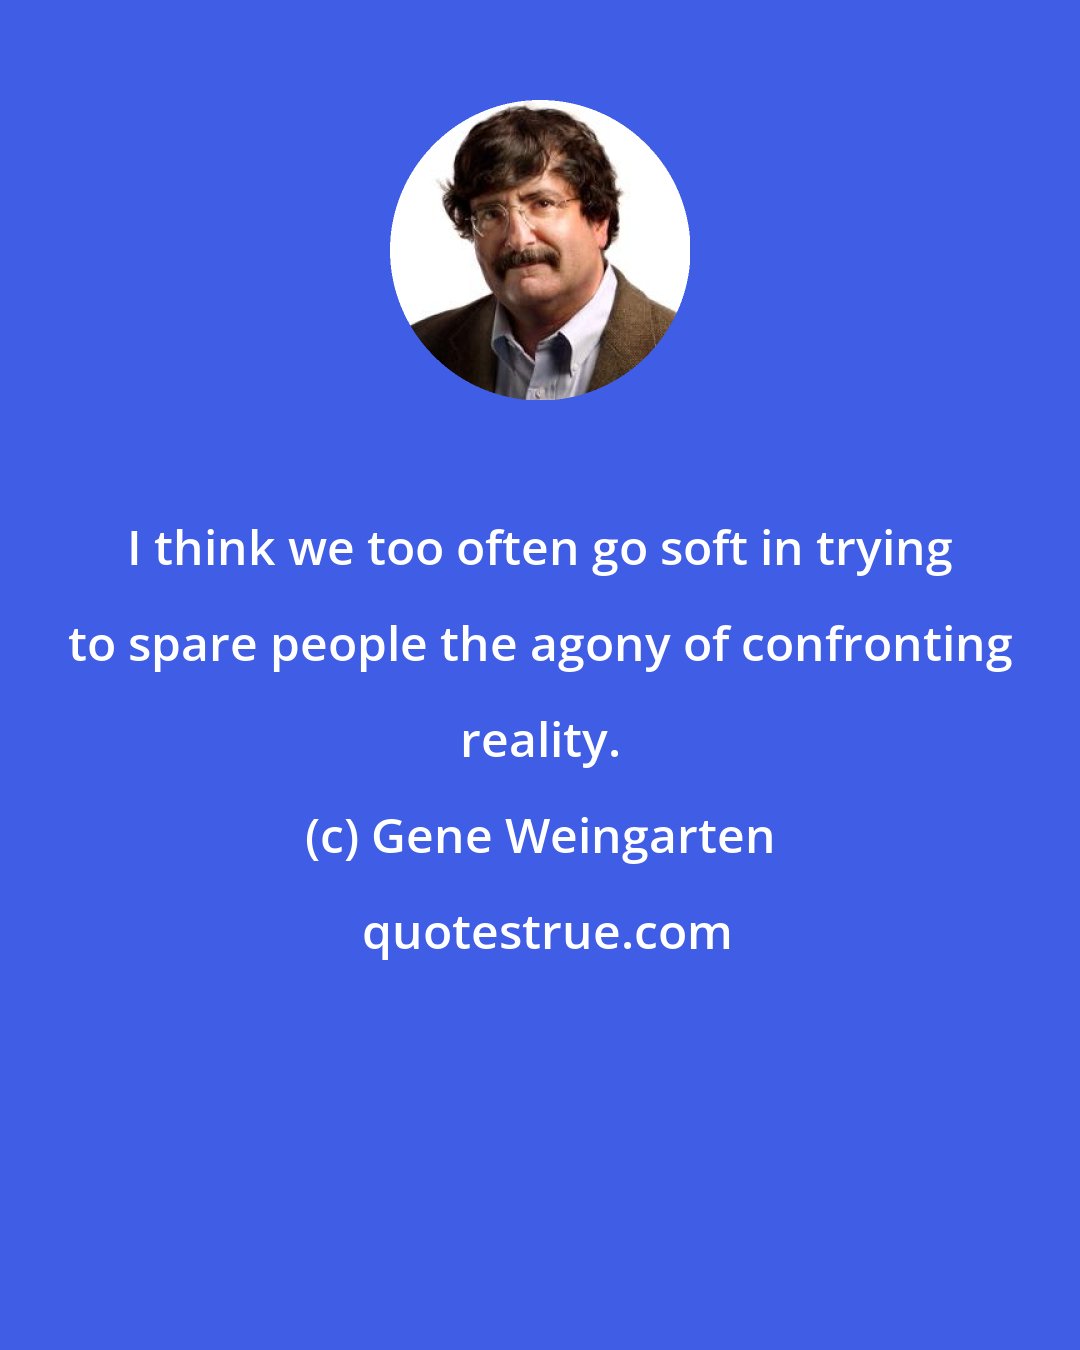 Gene Weingarten: I think we too often go soft in trying to spare people the agony of confronting reality.